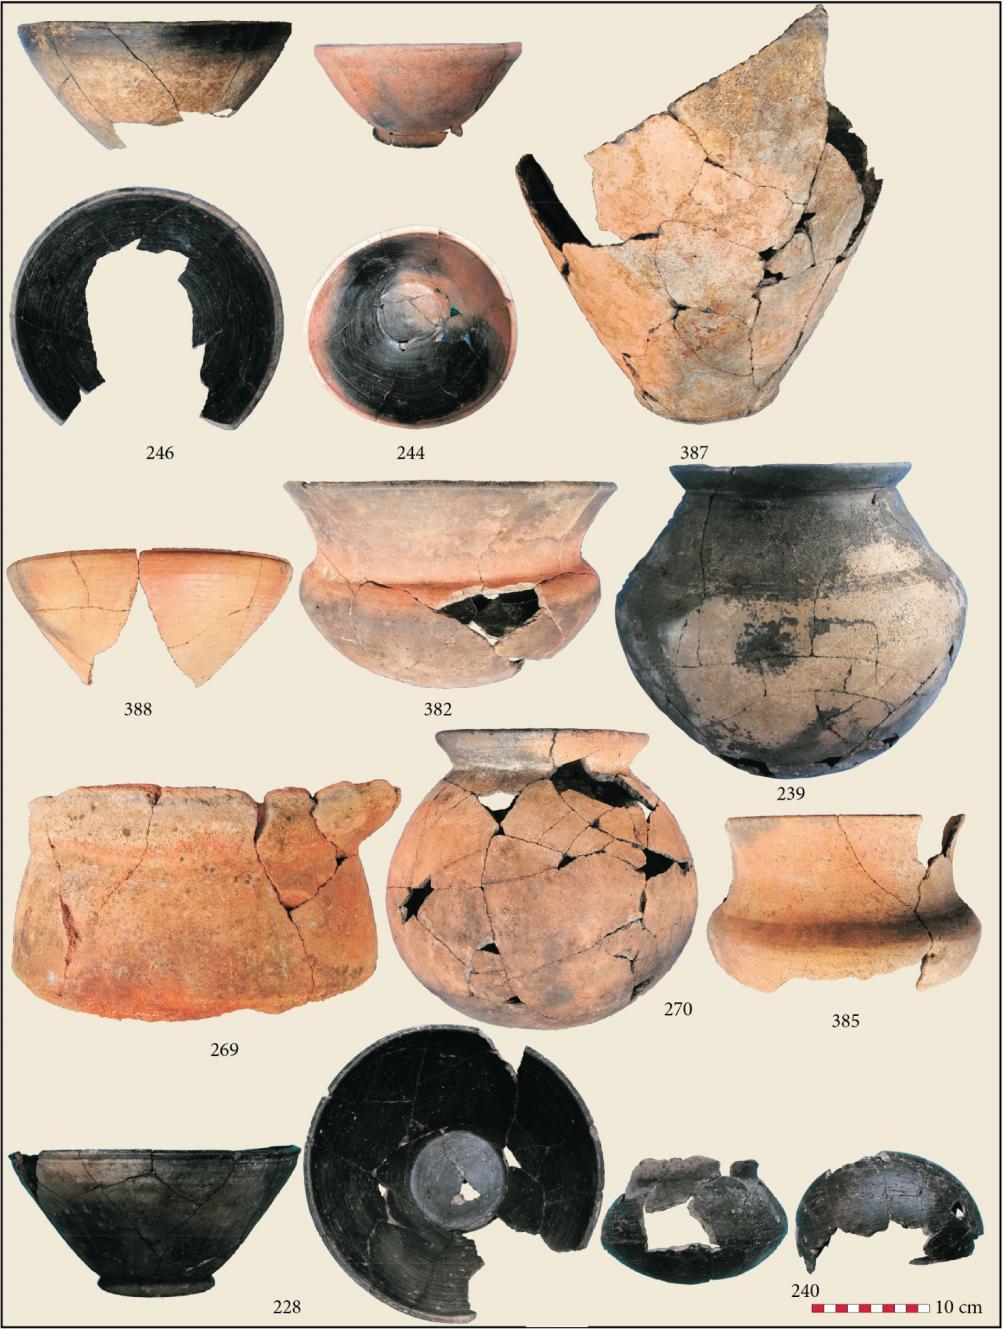 HIGHAM ET AL.: THE EXCAVATION OF NON BAN JAK, NORTHEAST THAILAND - A REPORT ON THE FIRST THREE SEASONS Figure 6: The ceramic vessels from occuation contexts Cat. B 5: F; cat. 44 B 5: F; cat.